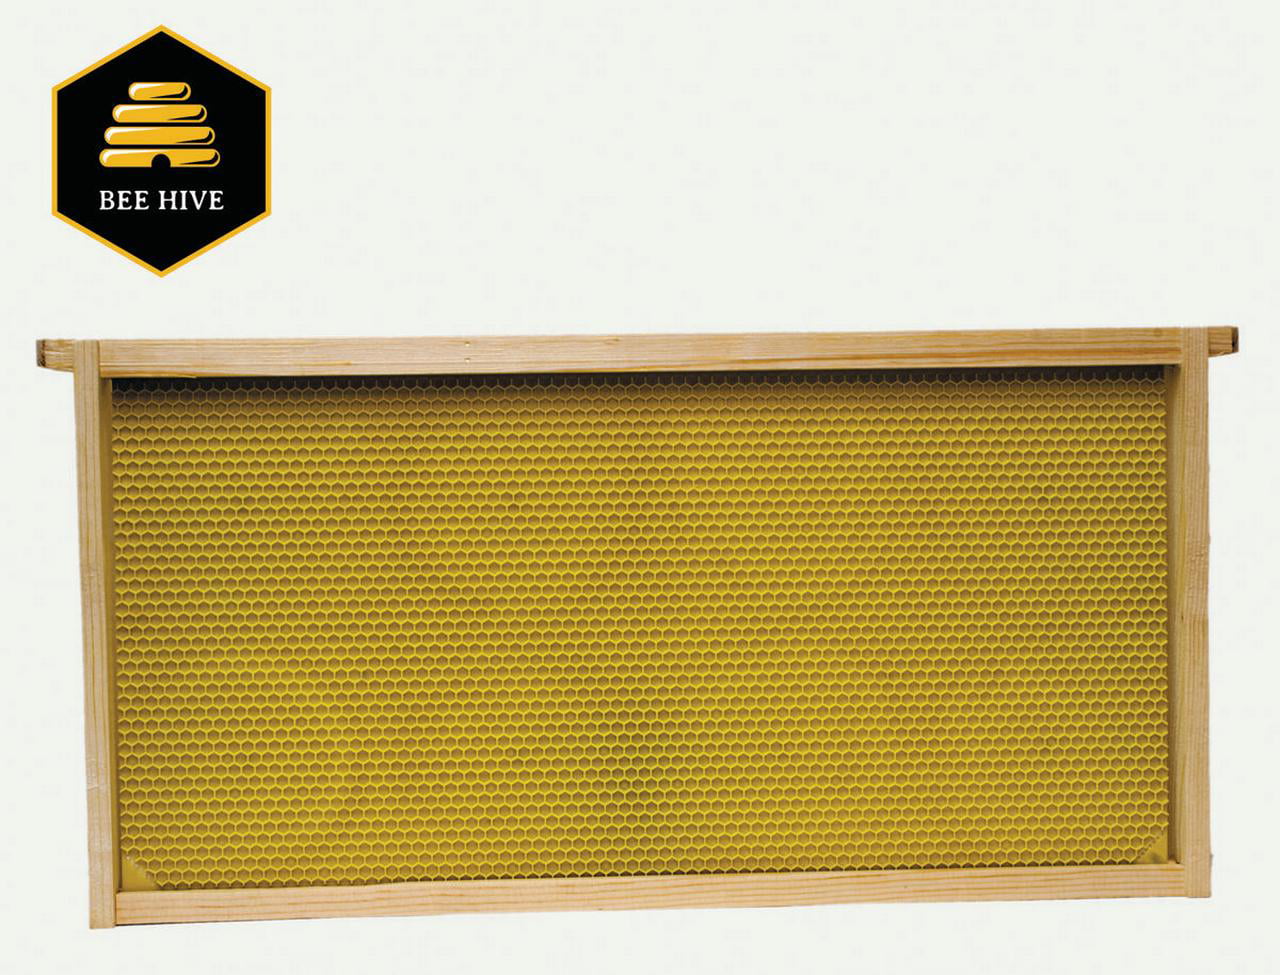 Harvest Lane Wwfdu-101-5 for sale online Beehive Body Frame Deep or Hive Wooden 5 Pk 